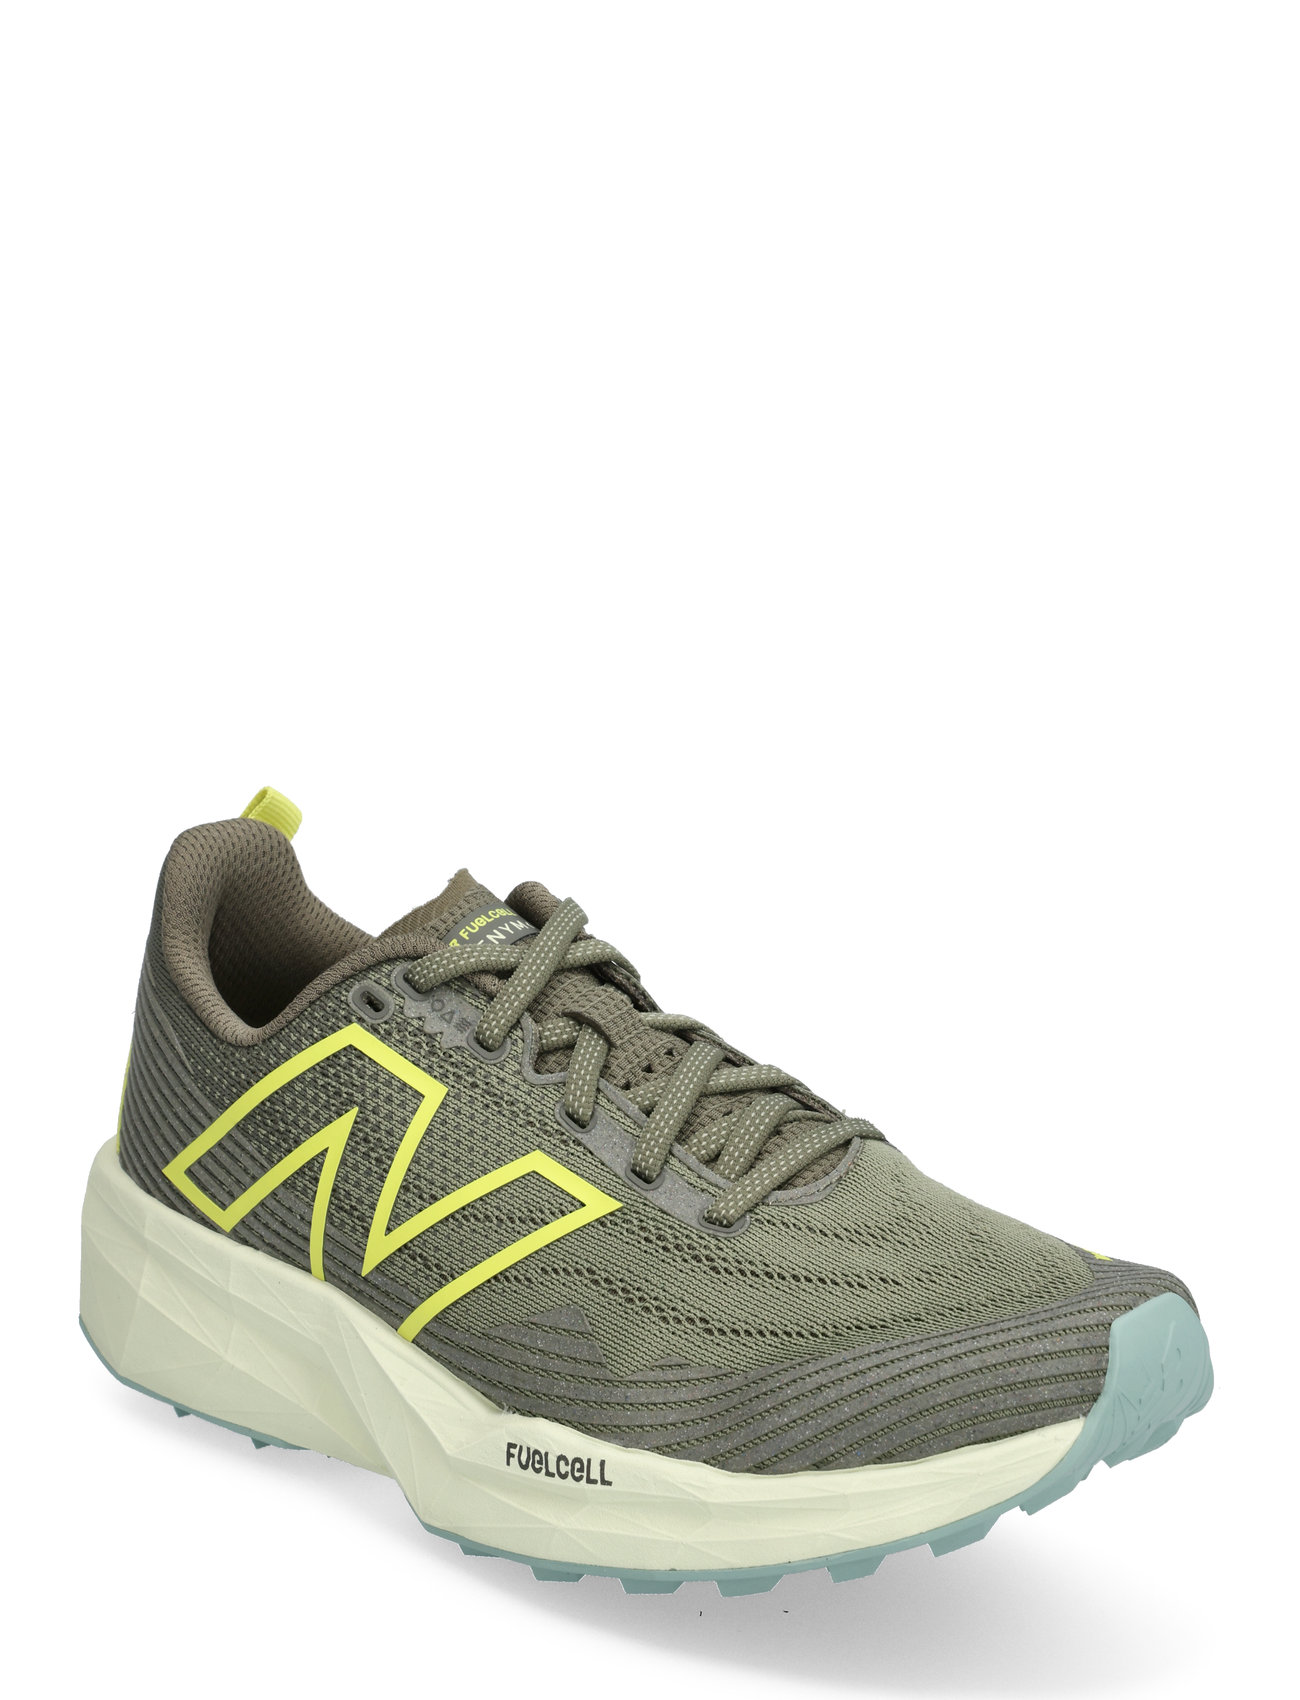 New Balance Fuelcell Summit Unknown V5 Sport Sport Shoes Running Shoes Khaki Green New Balance